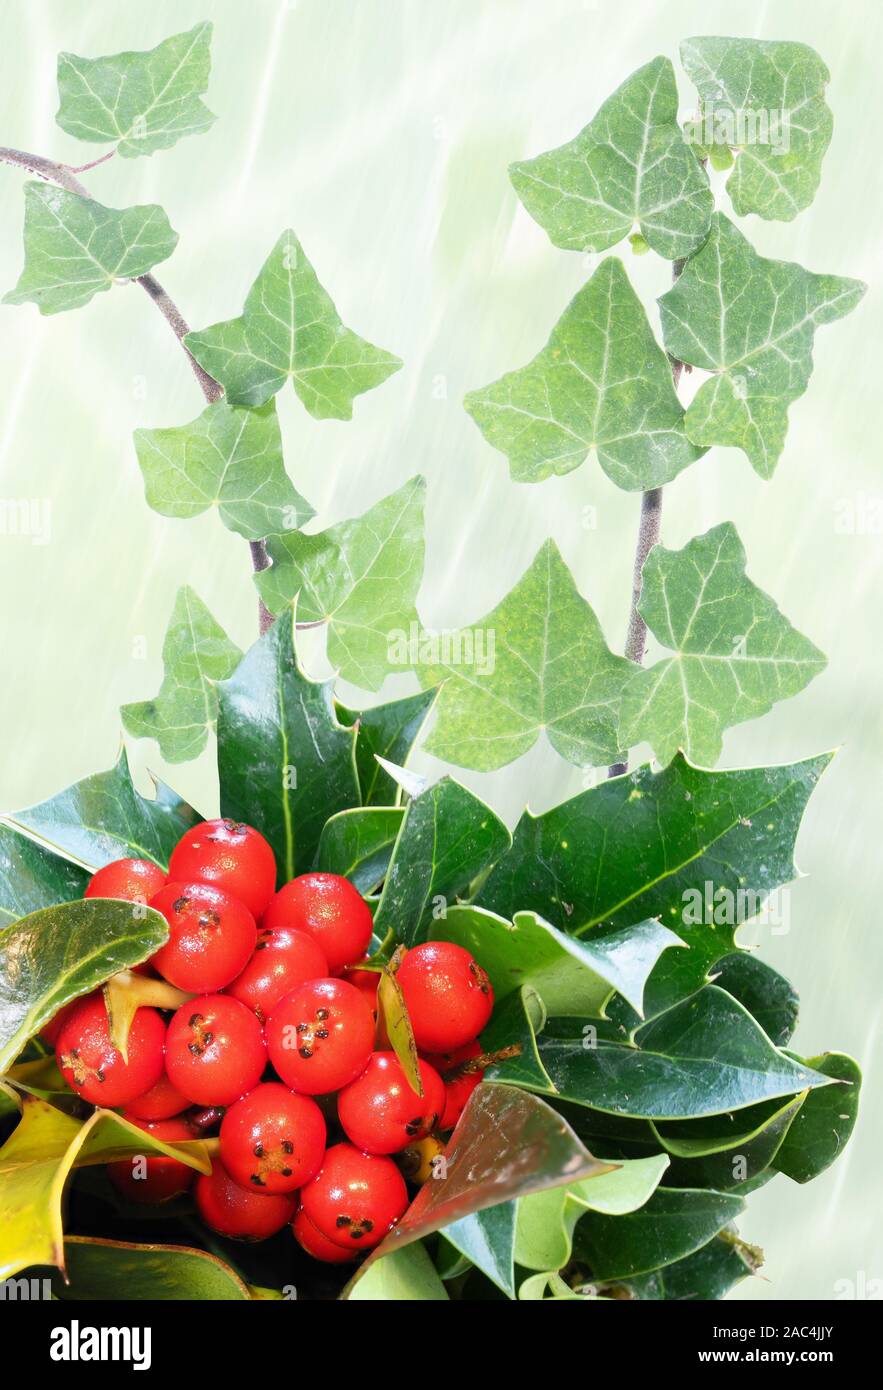 The Holly and the Ivy, Christmas greetings card Stock Photo